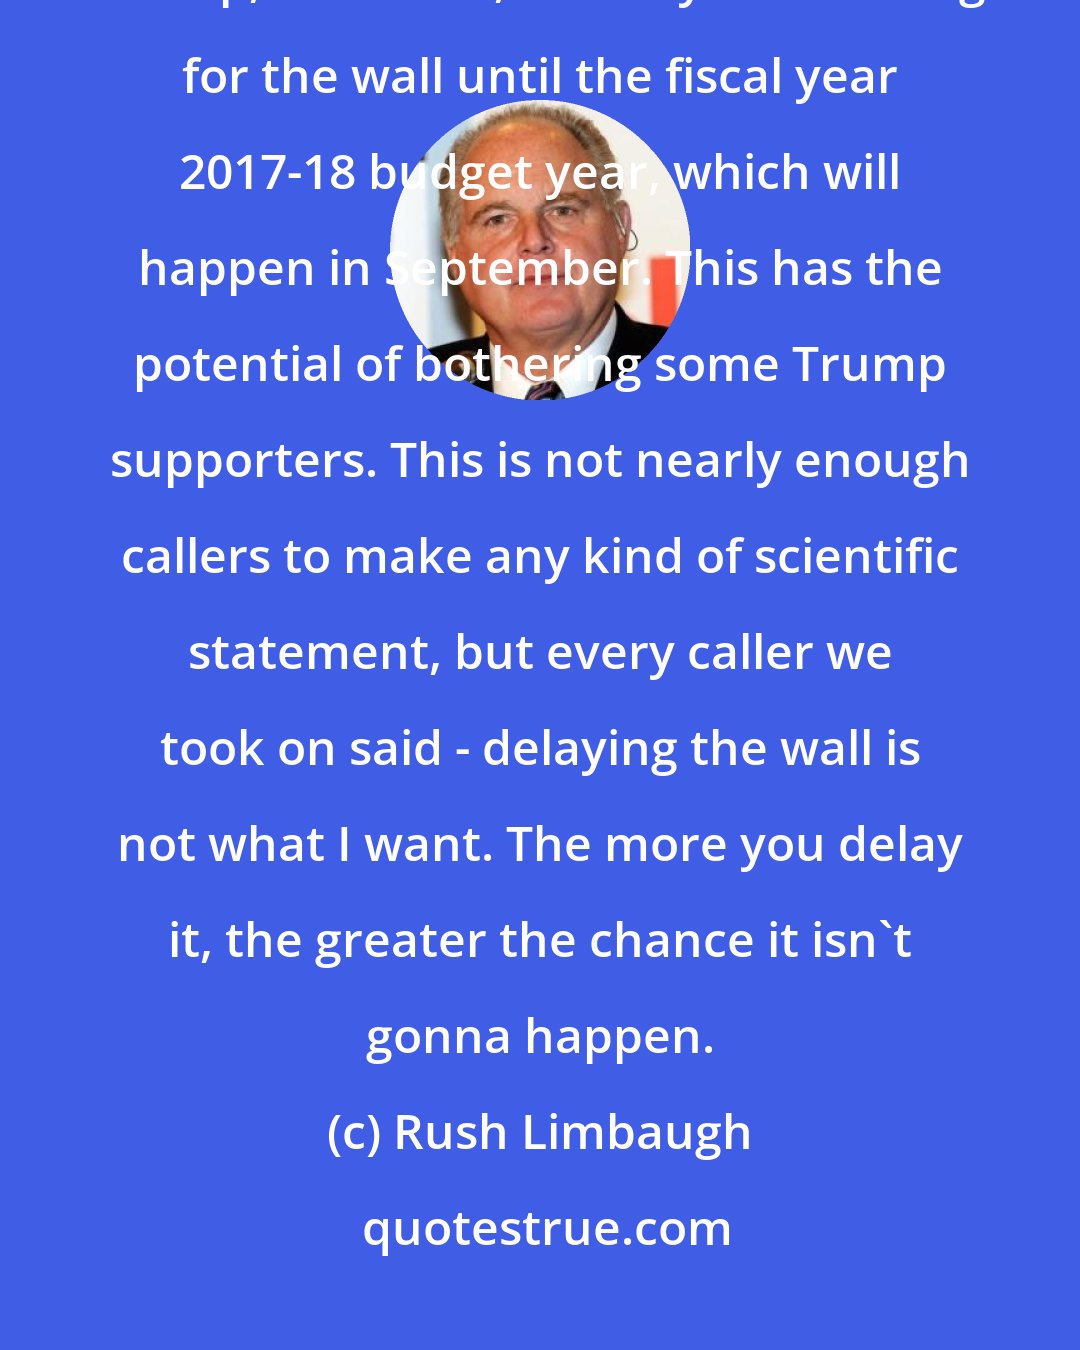 Rush Limbaugh: The threat of a government shutdown has caused the Republicans and Donald Trump, as of now, to delay the funding for the wall until the fiscal year 2017-18 budget year, which will happen in September. This has the potential of bothering some Trump supporters. This is not nearly enough callers to make any kind of scientific statement, but every caller we took on said - delaying the wall is not what I want. The more you delay it, the greater the chance it isn't gonna happen.